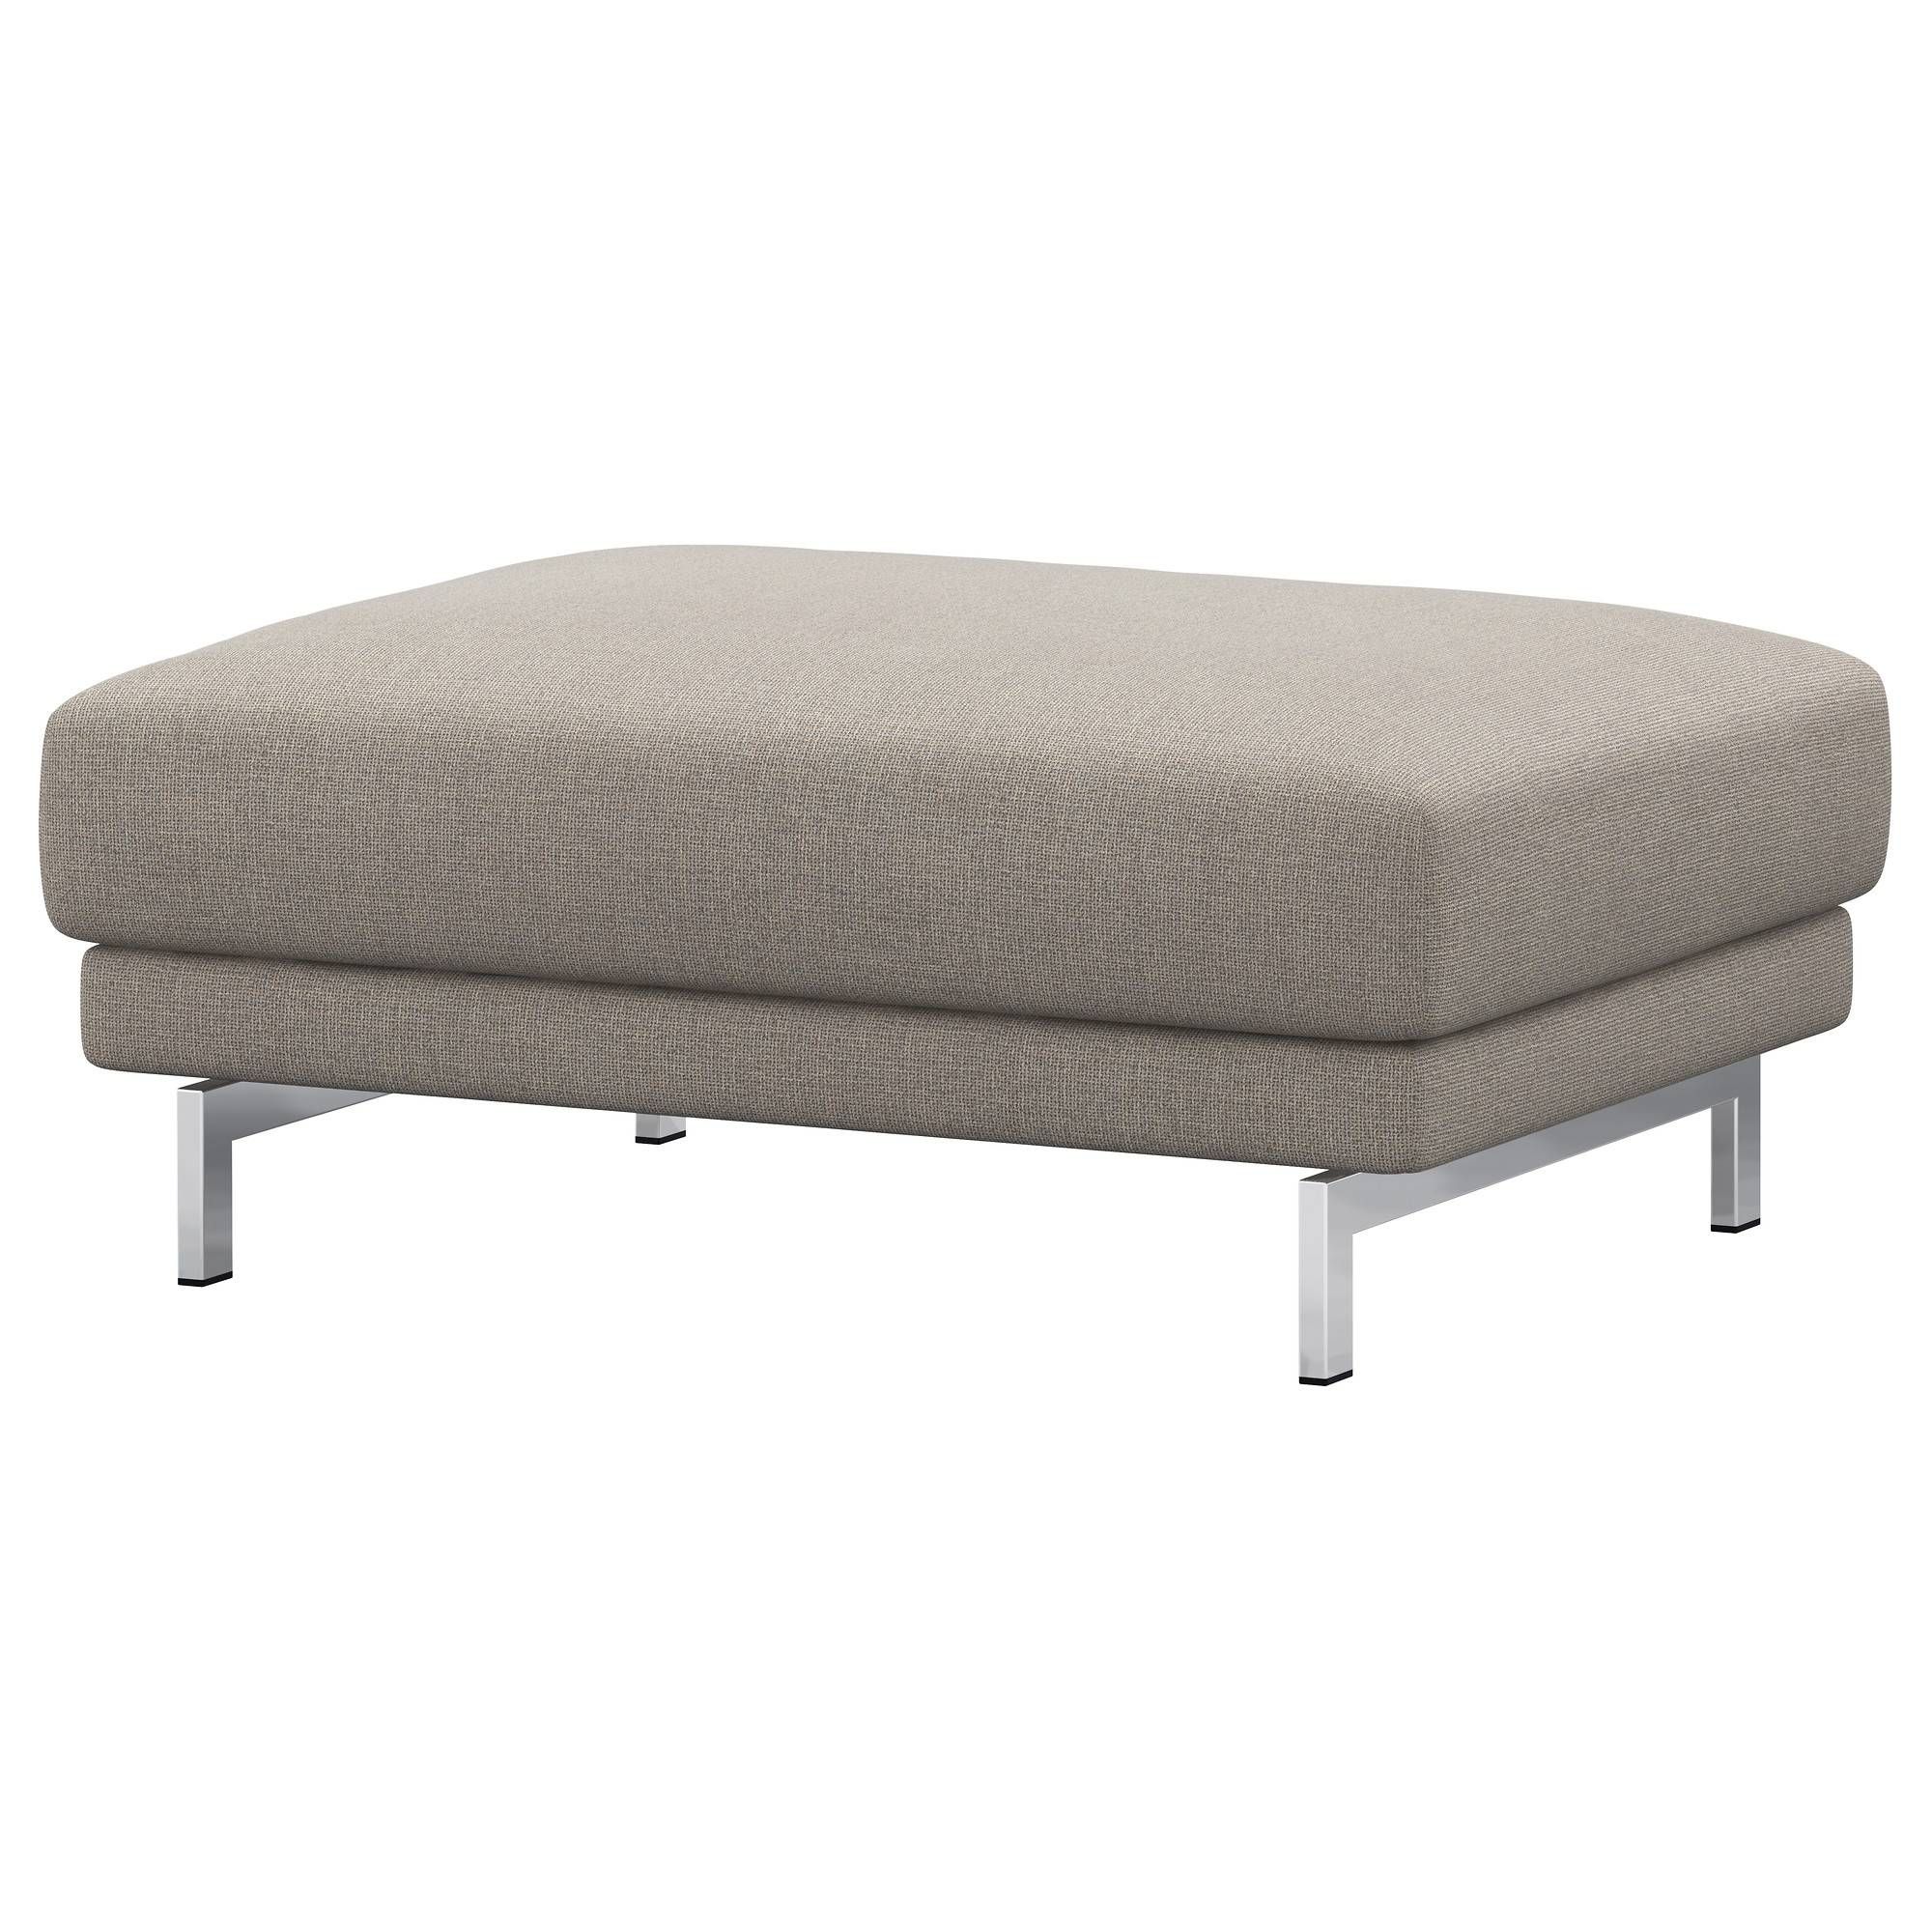 Nockeby Footstool Tenö Light Grey/chrome Plated – Ikea Within Fabric Footstools (View 4 of 30)